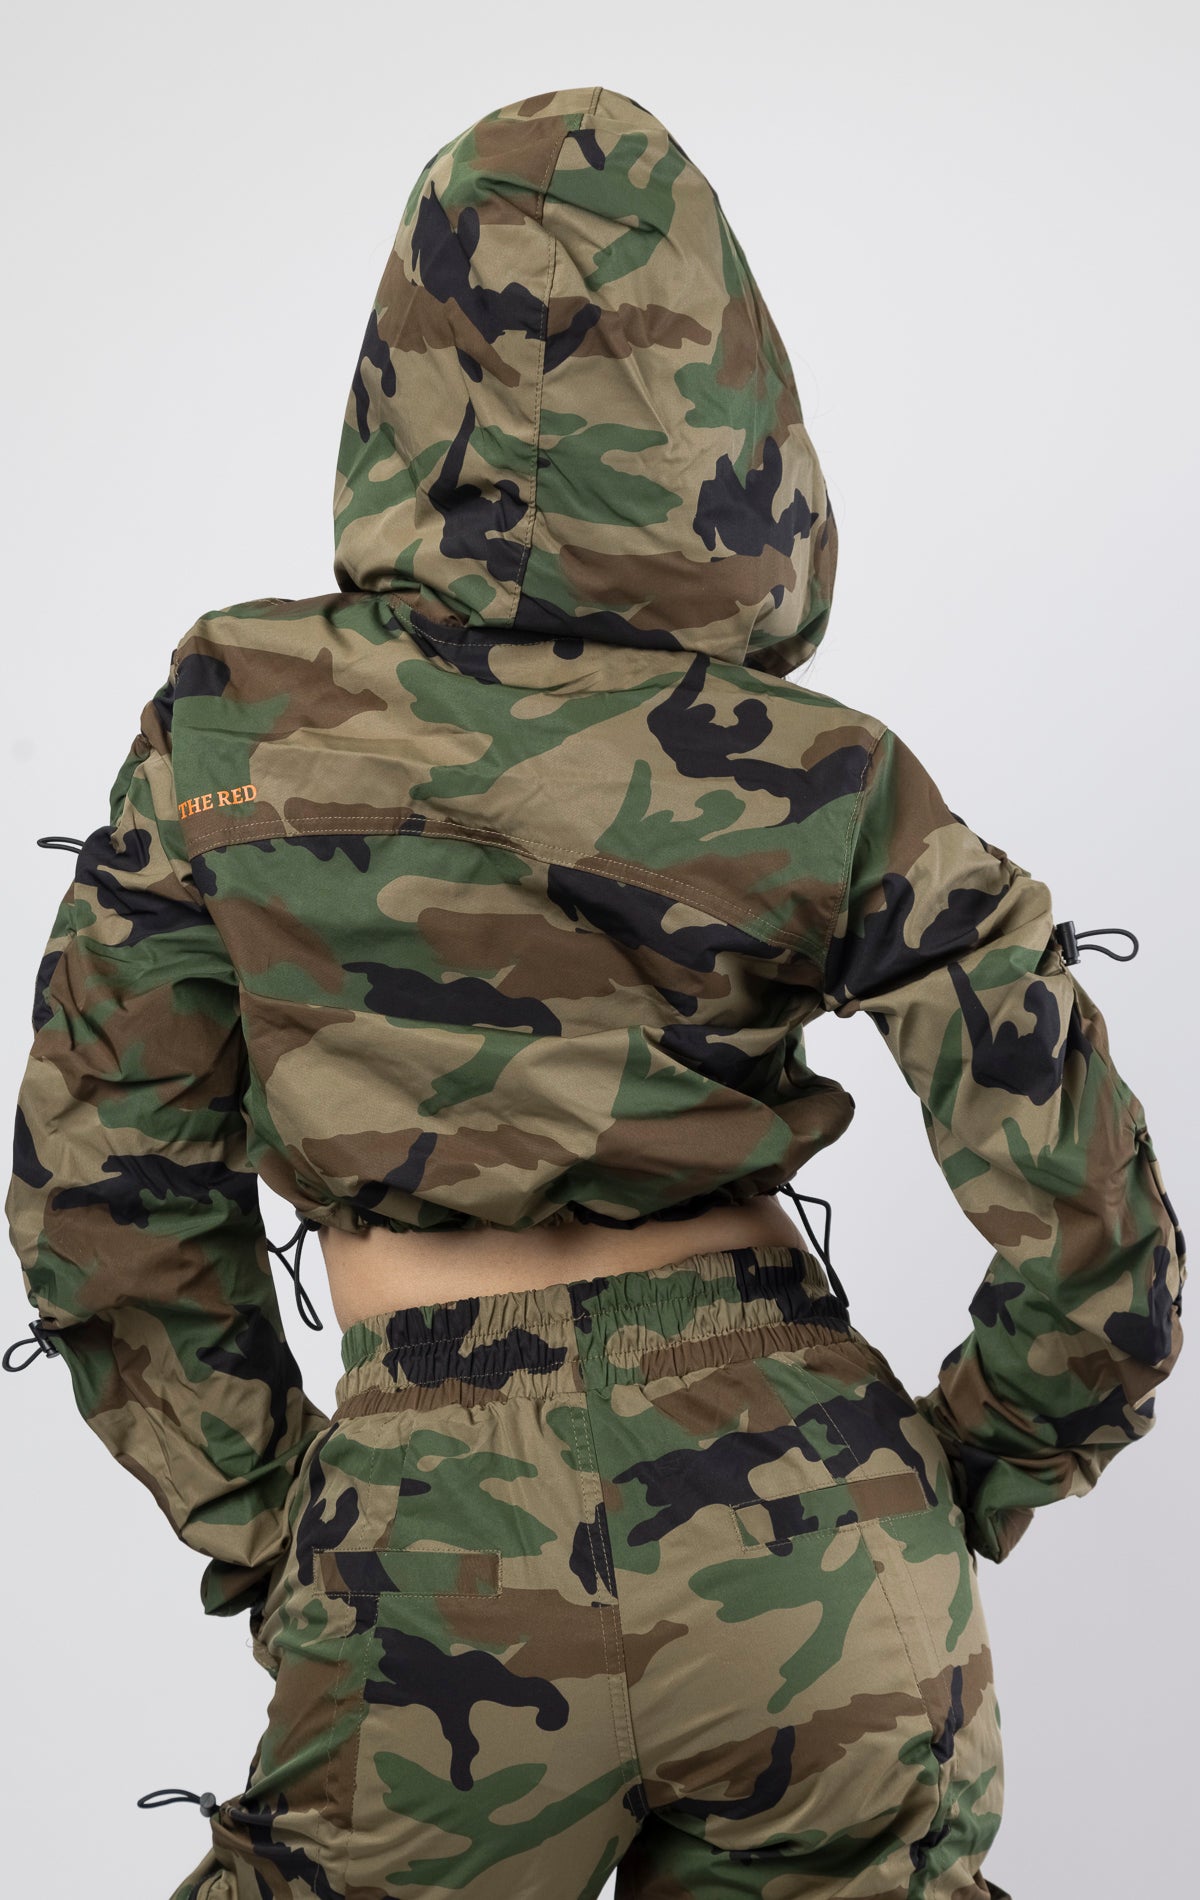 Wood camo Cropped windbreaker full zip jacket. Fit: Carter metal eyelets3-D cargo pocket with self strap, adjustable bottom opening, and cuffed hem